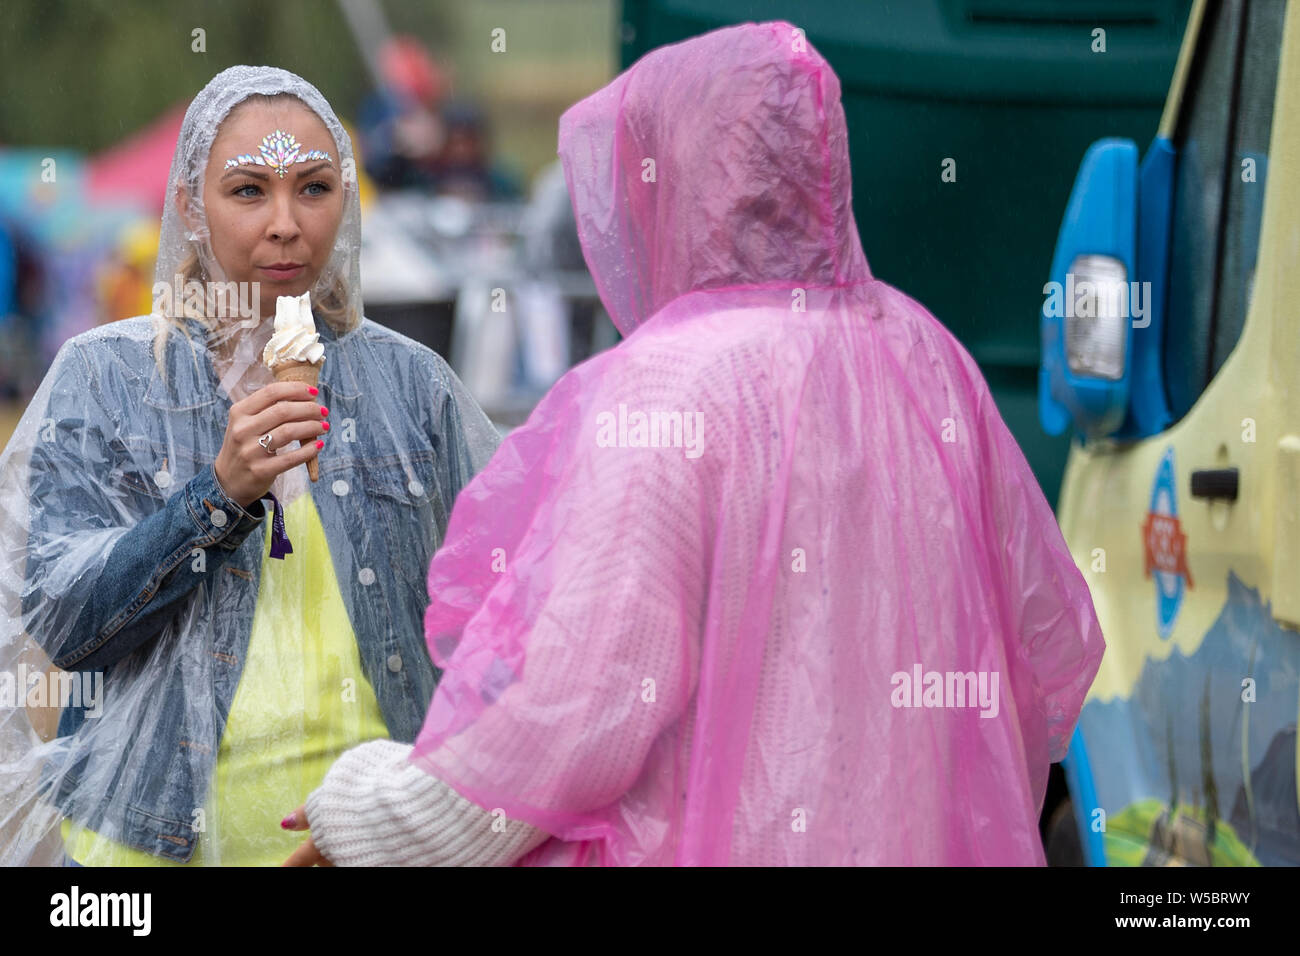 Standon, UK. Saturday 27 July 2019.  festival attendees eating ice cream wearing ponchos in the rain at Standon Calling set in the picturesque grounds of Standon Lordship © Jason Richardson / Alamy Live News Stock Photo